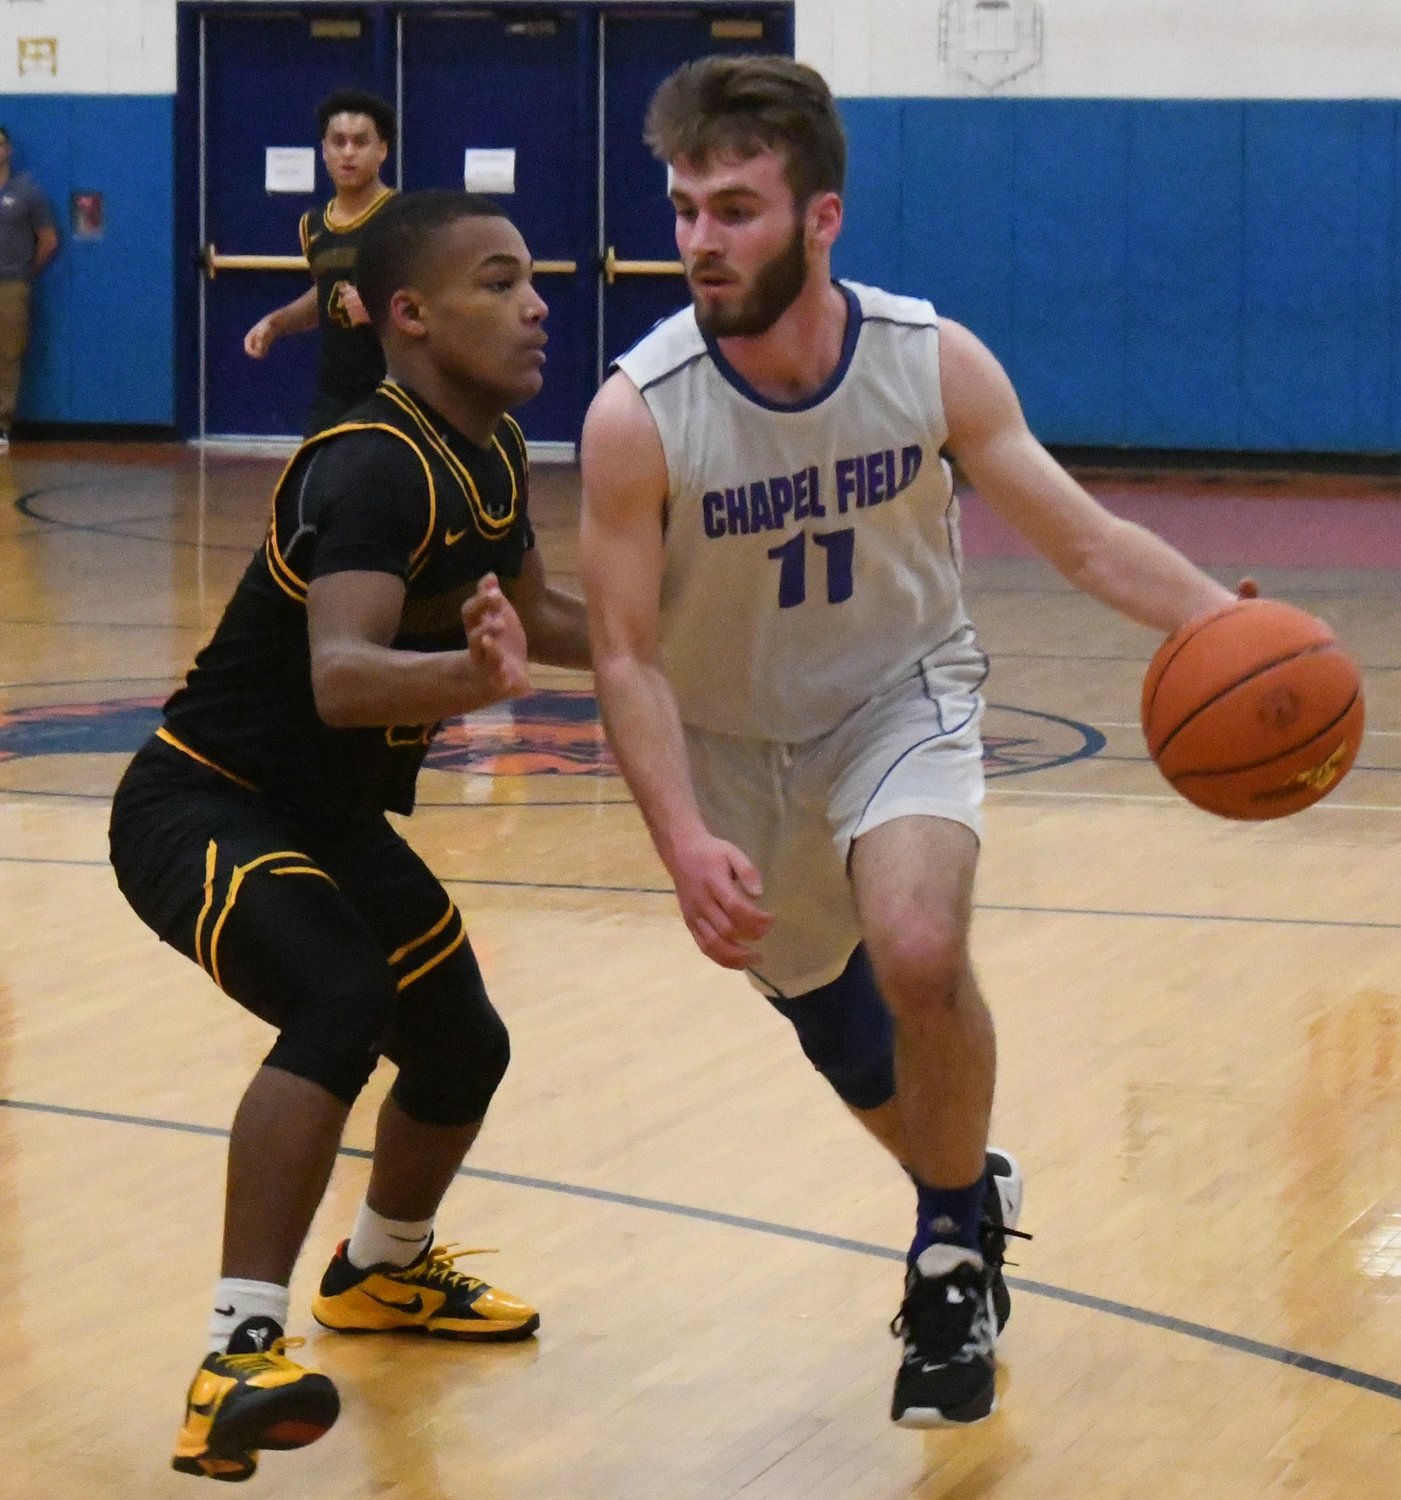 Chapel Field's Mikey Bonagura drives past Bridgehampton's Mikhail Feaster during a NYSPHSAA Class D subregional game on March 7 at S.S. Seward Institute in Florida.